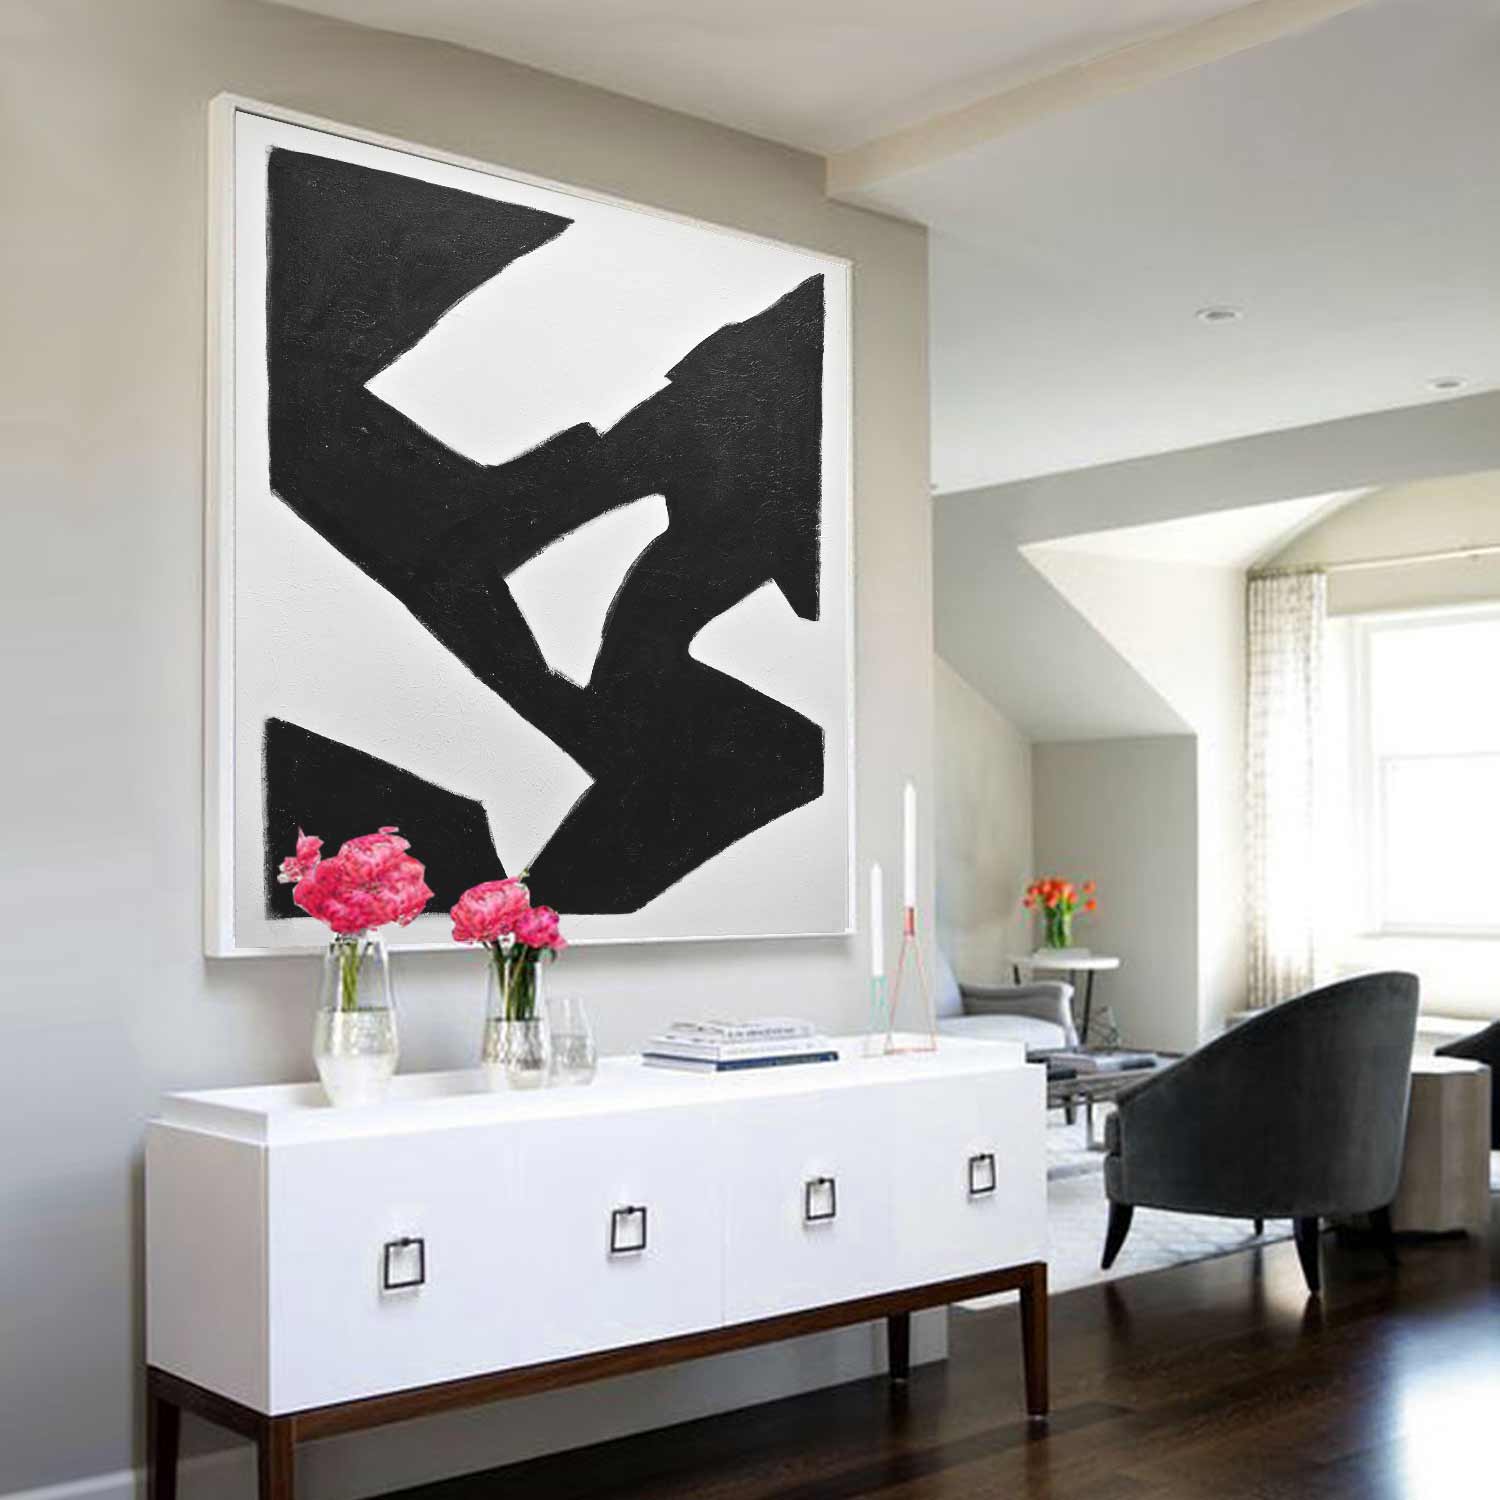 Black And White Abstract Expressionist Painting "Elevate"